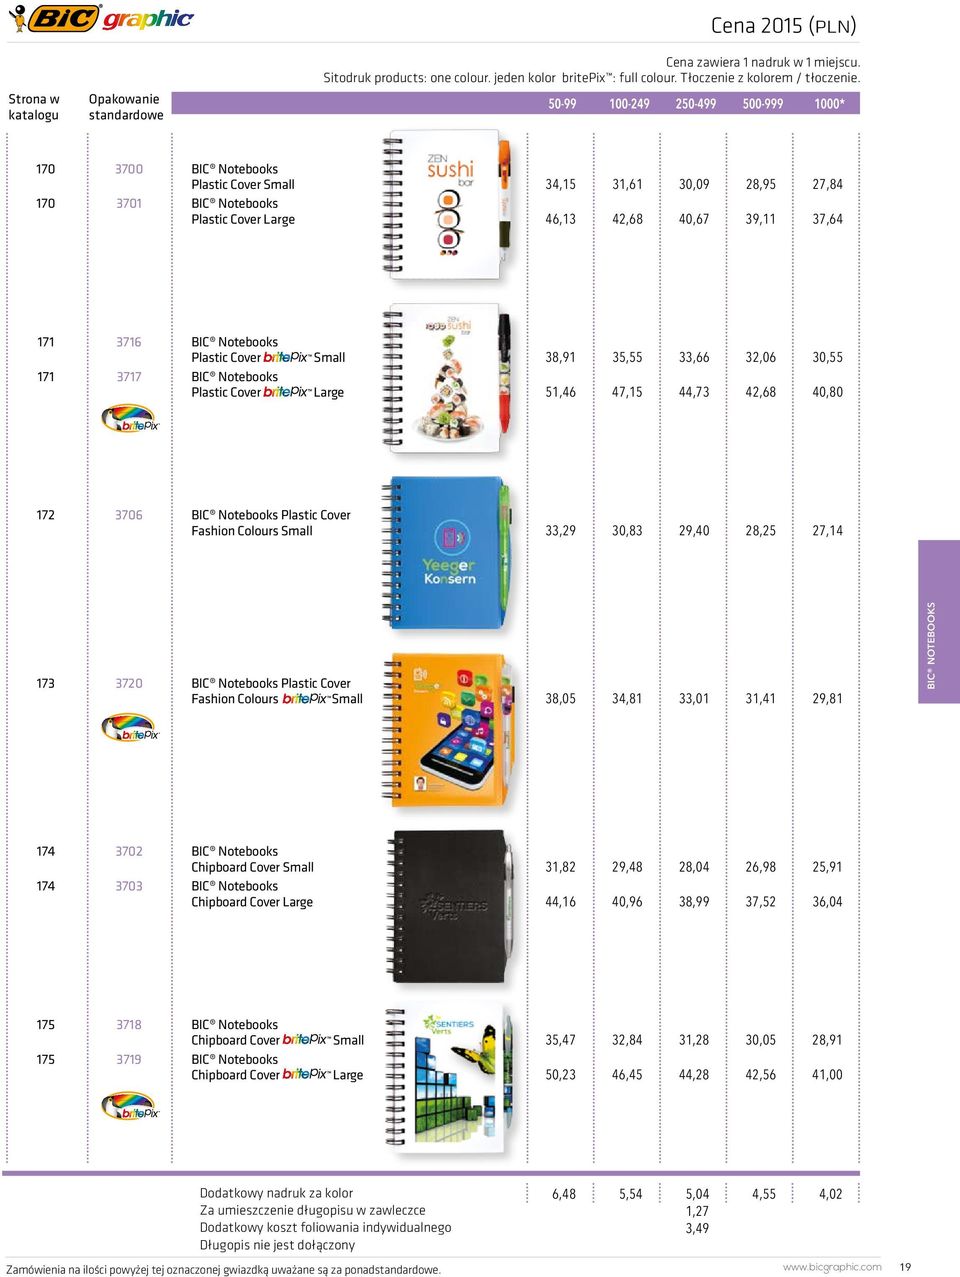 BIC Notebooks Plastic Cover BIC Notebooks Plastic Cover Small Large 38,91 35,55 33,66 32,06 30,55 51,46 47,15 44,73 42,68 40,80 172 3706 BIC Notebooks Plastic Cover Fashion Colours Small 33,29 30,83